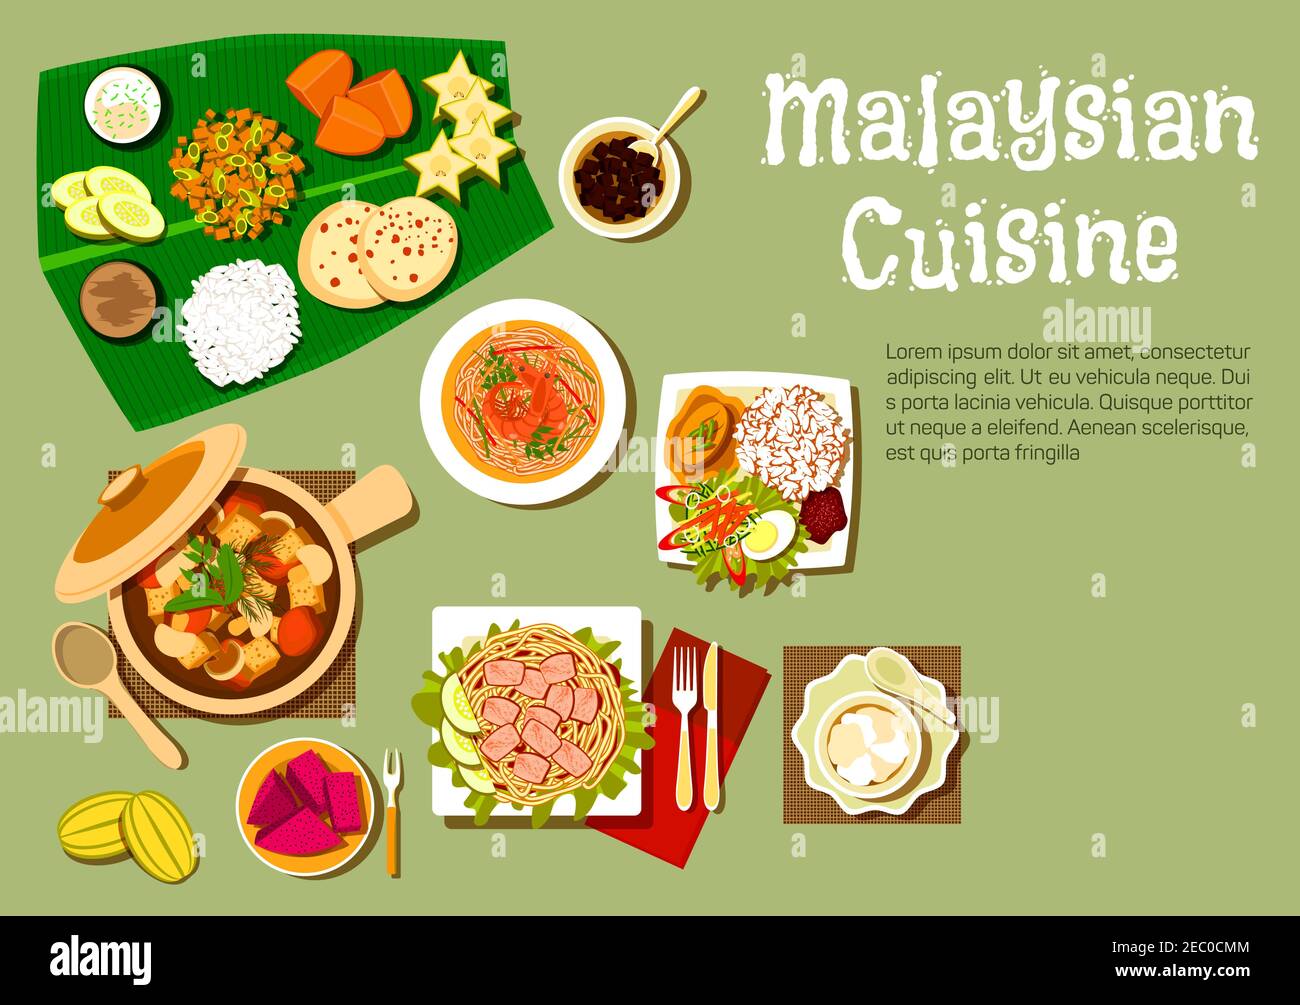 Malaysian cuisine with nasi lemak rice and prawn noodle, tofu noodle with curry, pork stew with mushrooms and tofu, passion fruit and carambola, mango Stock Vector